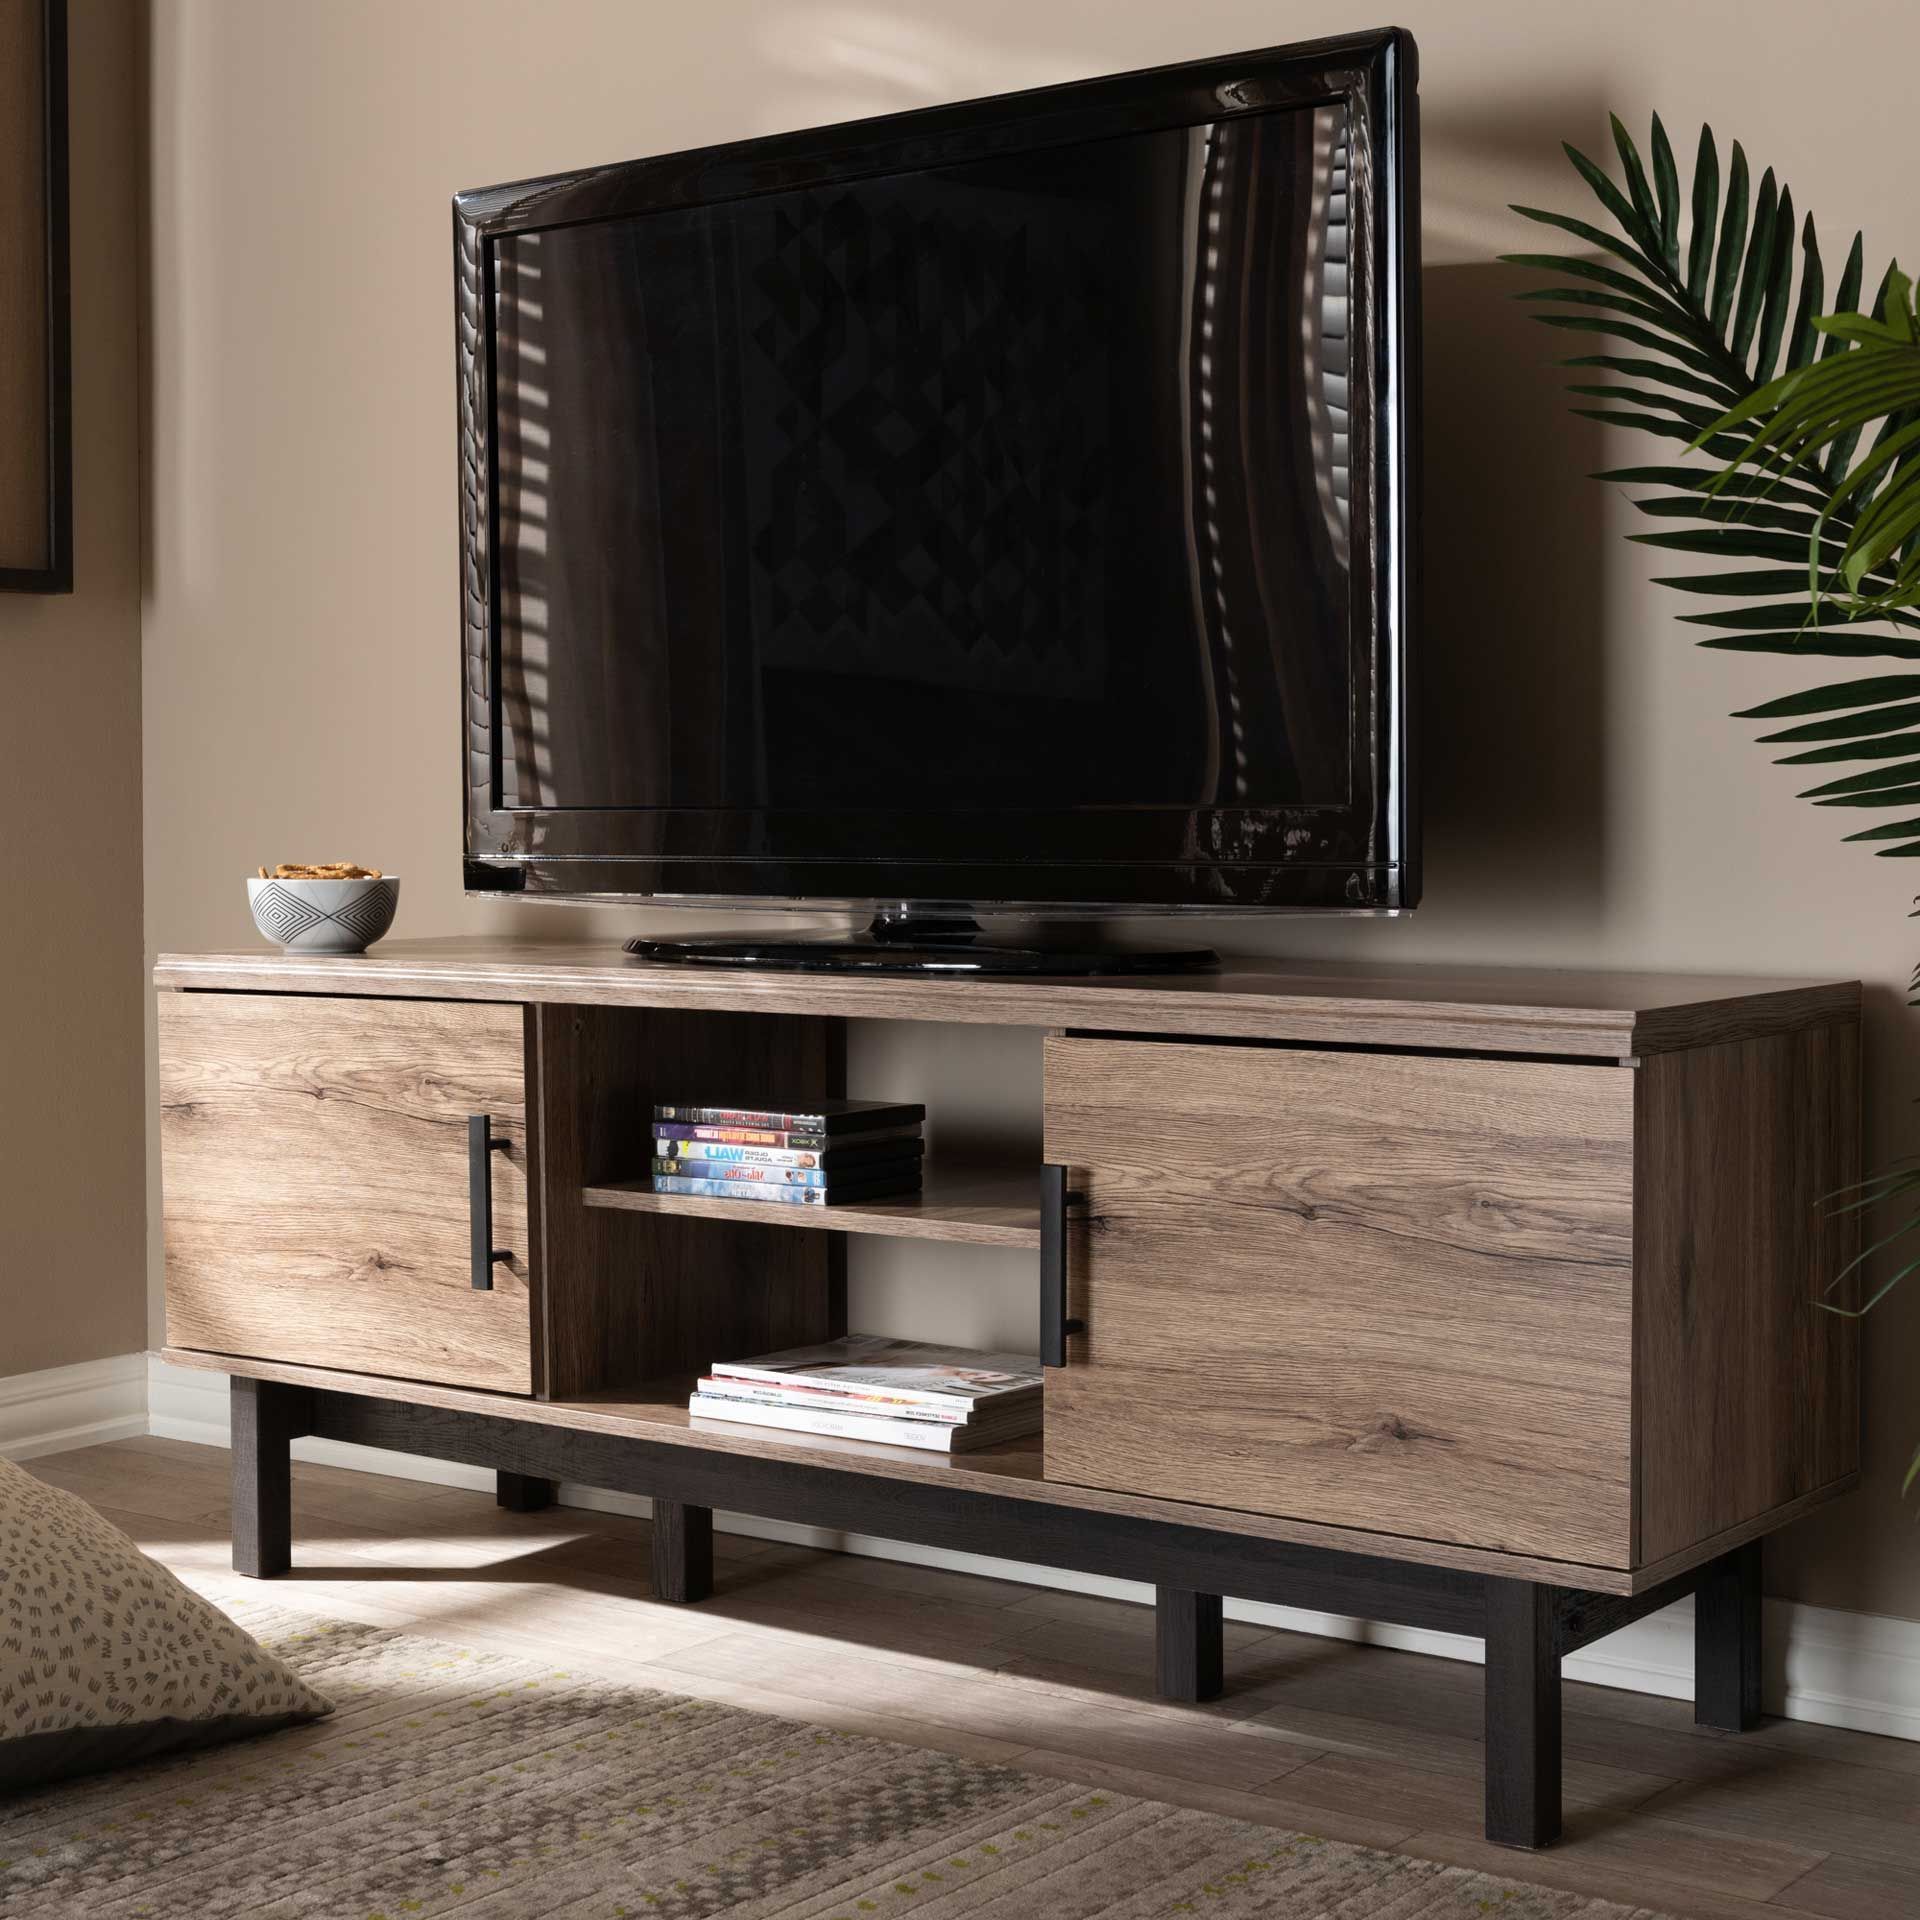 Trendy Tv Stands With 2 Doors And 2 Open Shelves Intended For Clean Lines And A Display Of Natural Wood Grains Make The Ariel Tv (View 3 of 15)